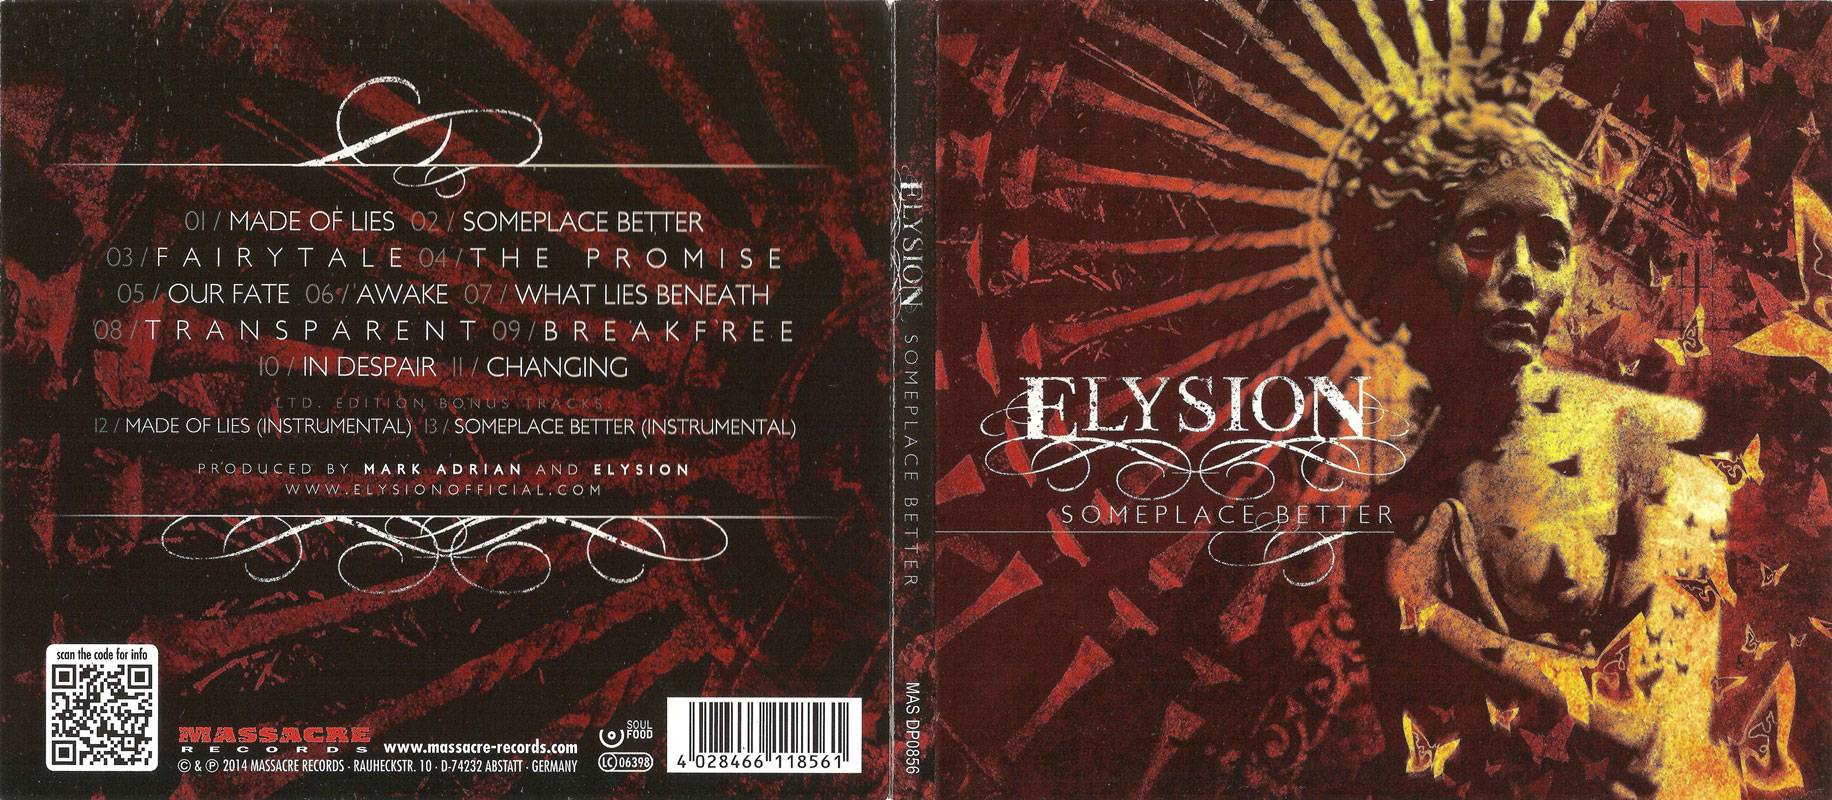 Elysion someplace better track lists 1001 rtdf amibroker forex